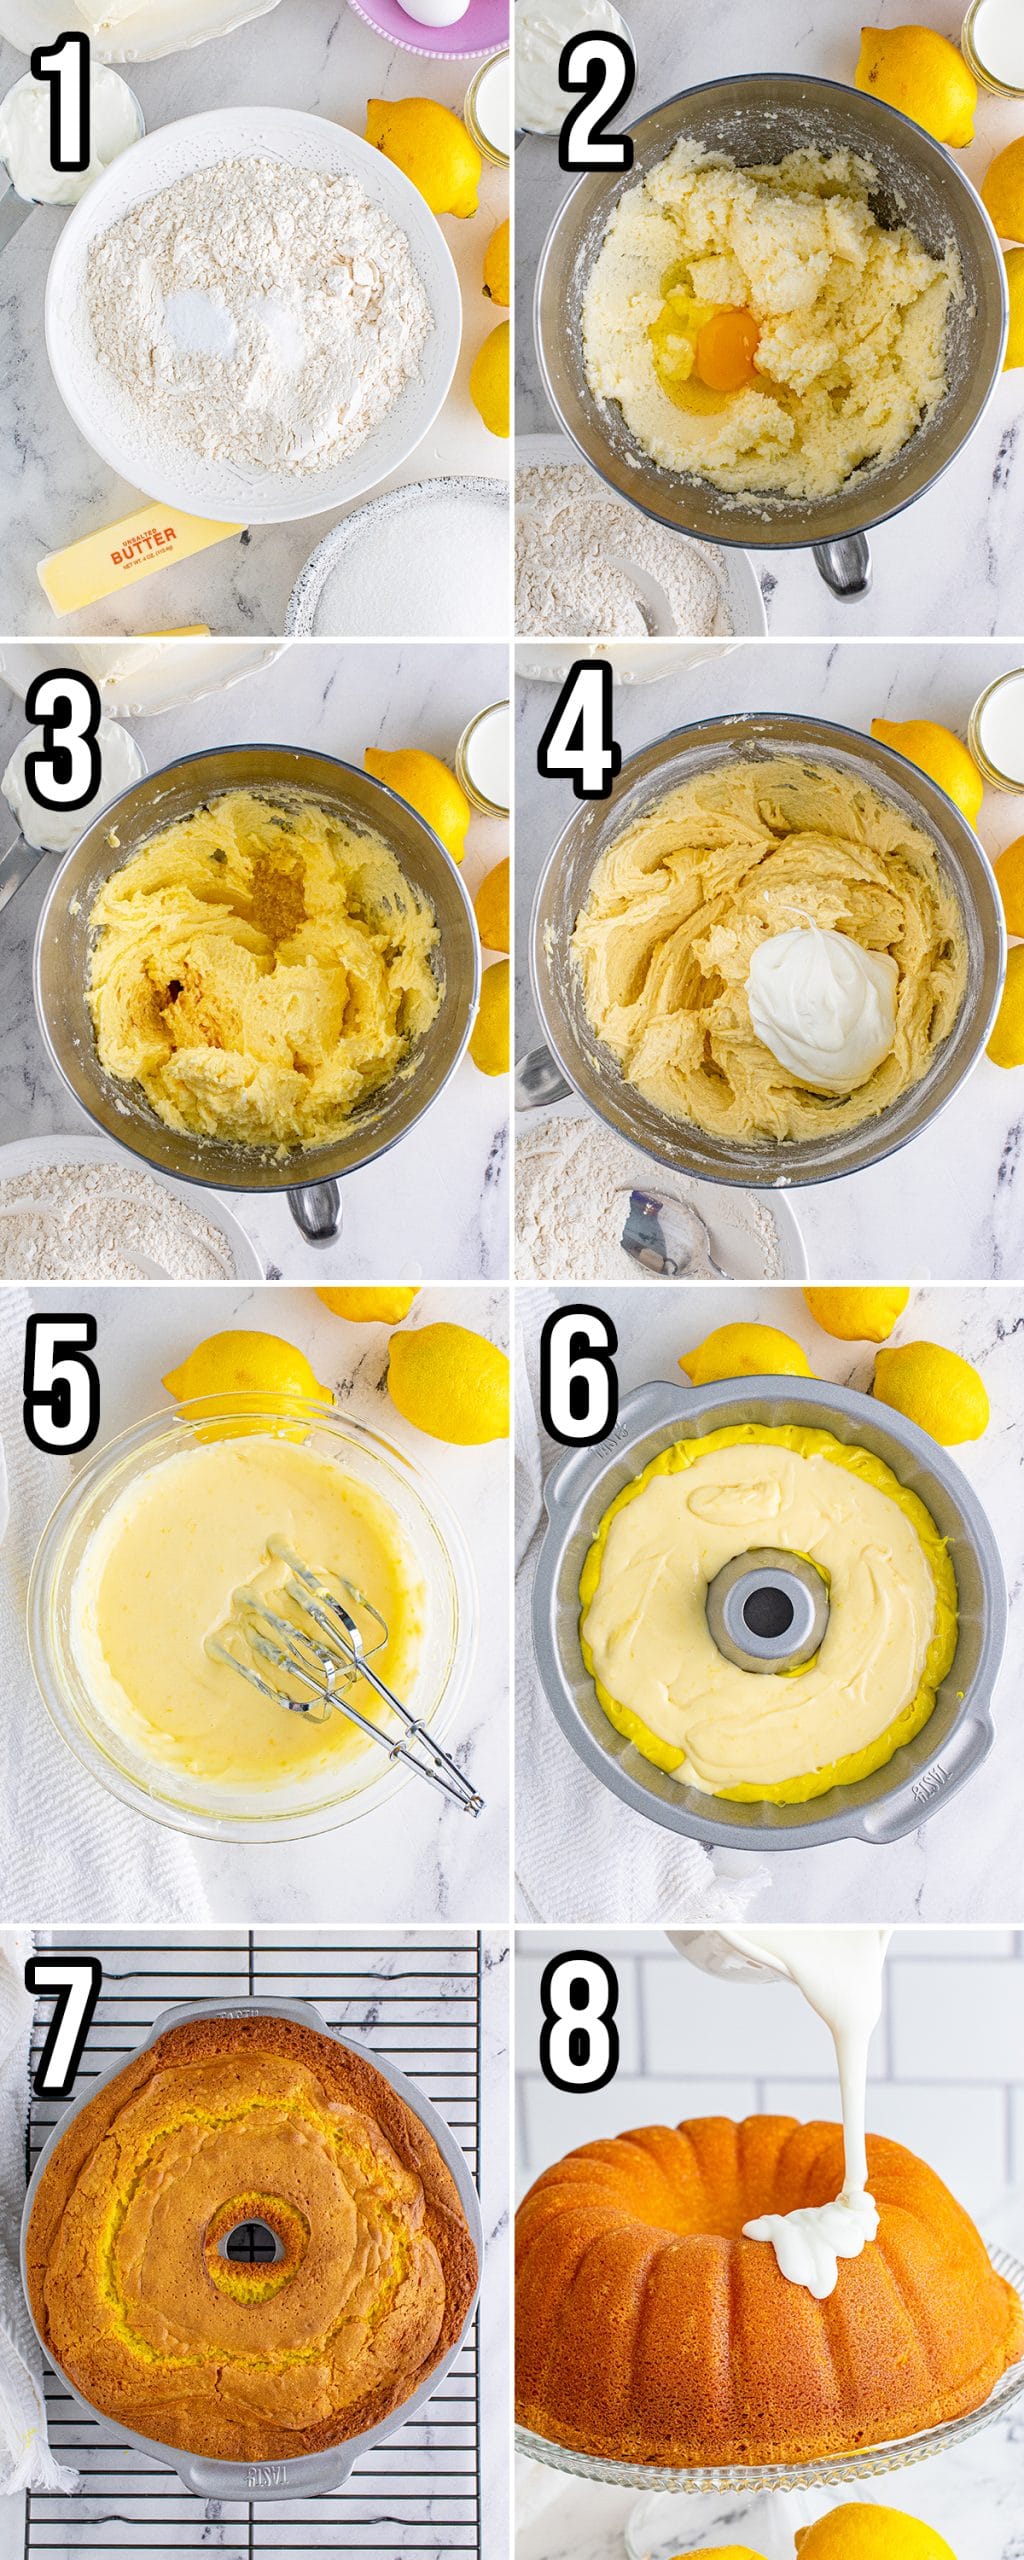 A collage of 8 step by step images showing how to make a lemon cream cheese bundt cake.